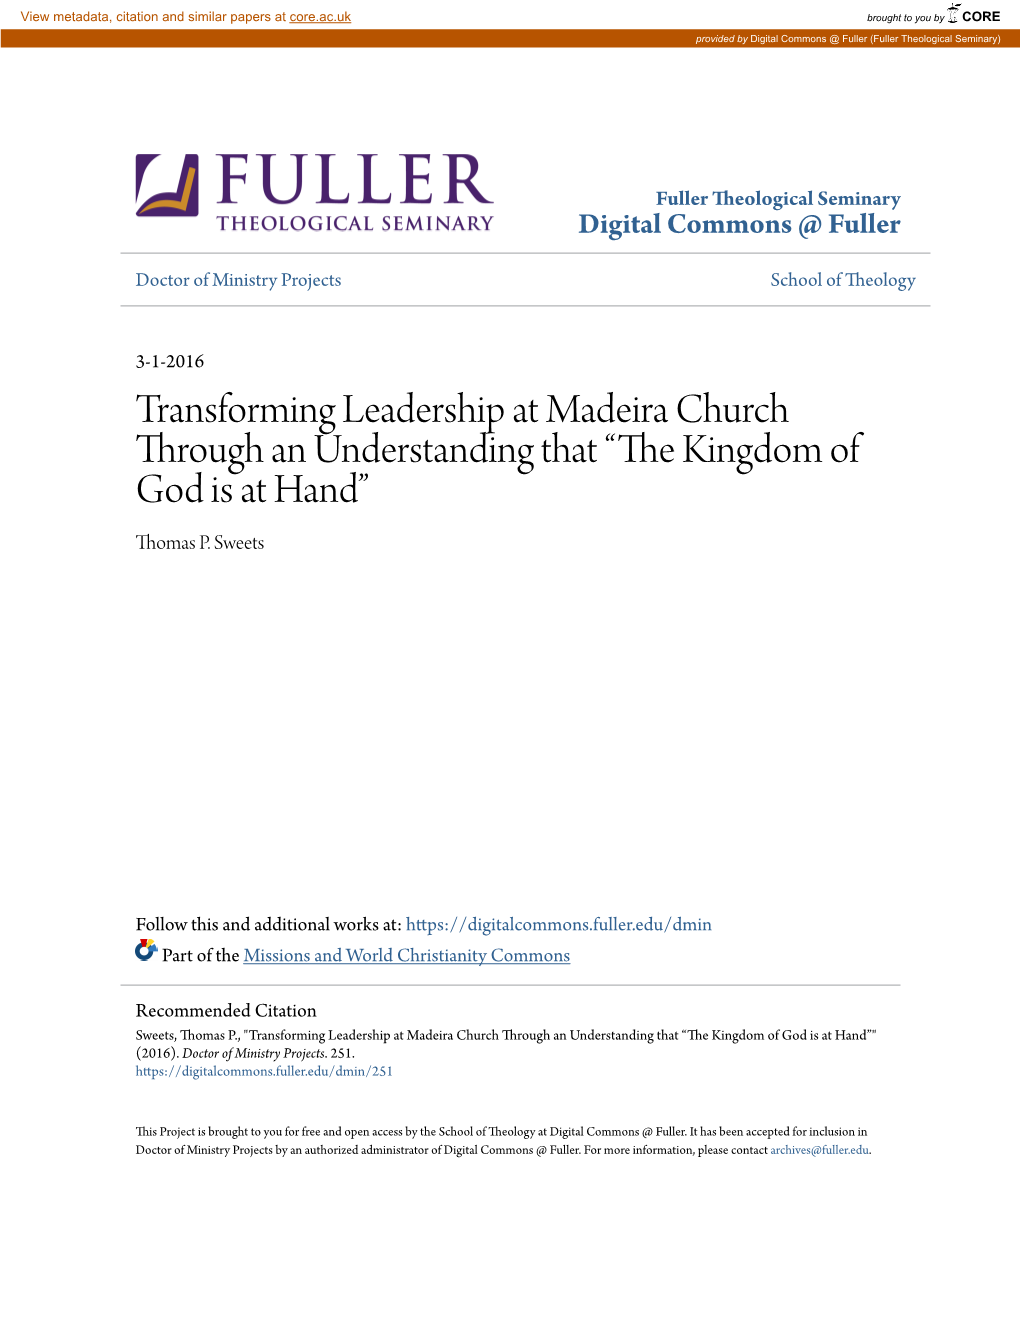 Transforming Leadership at Madeira Church Through an Understanding That “The Kingdom of God Is at Hand” Thomas P